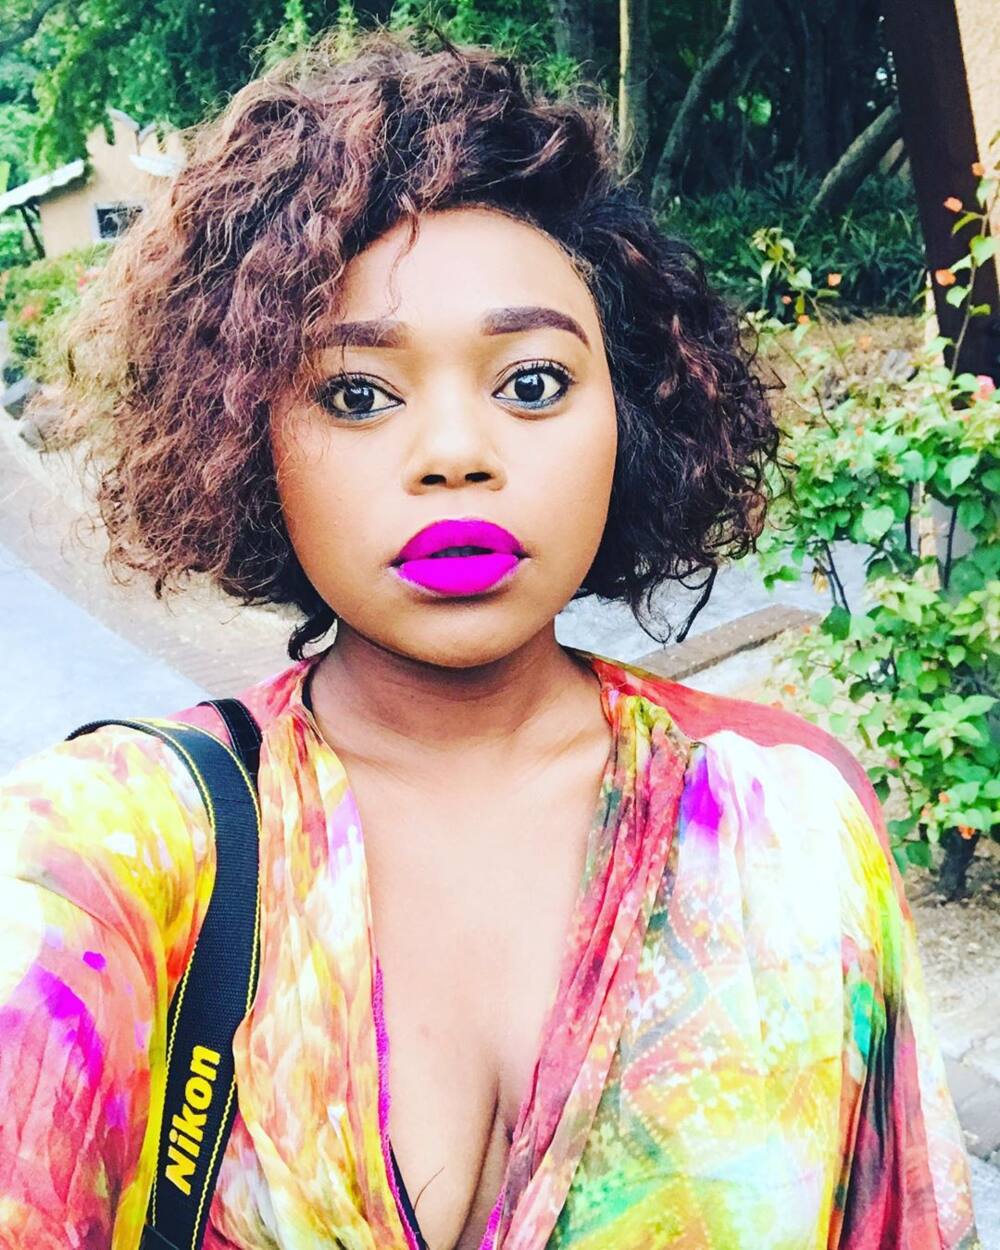 Pearl Shongwe age, partner, parents, Metro FM, stunning pics, car and Instagram